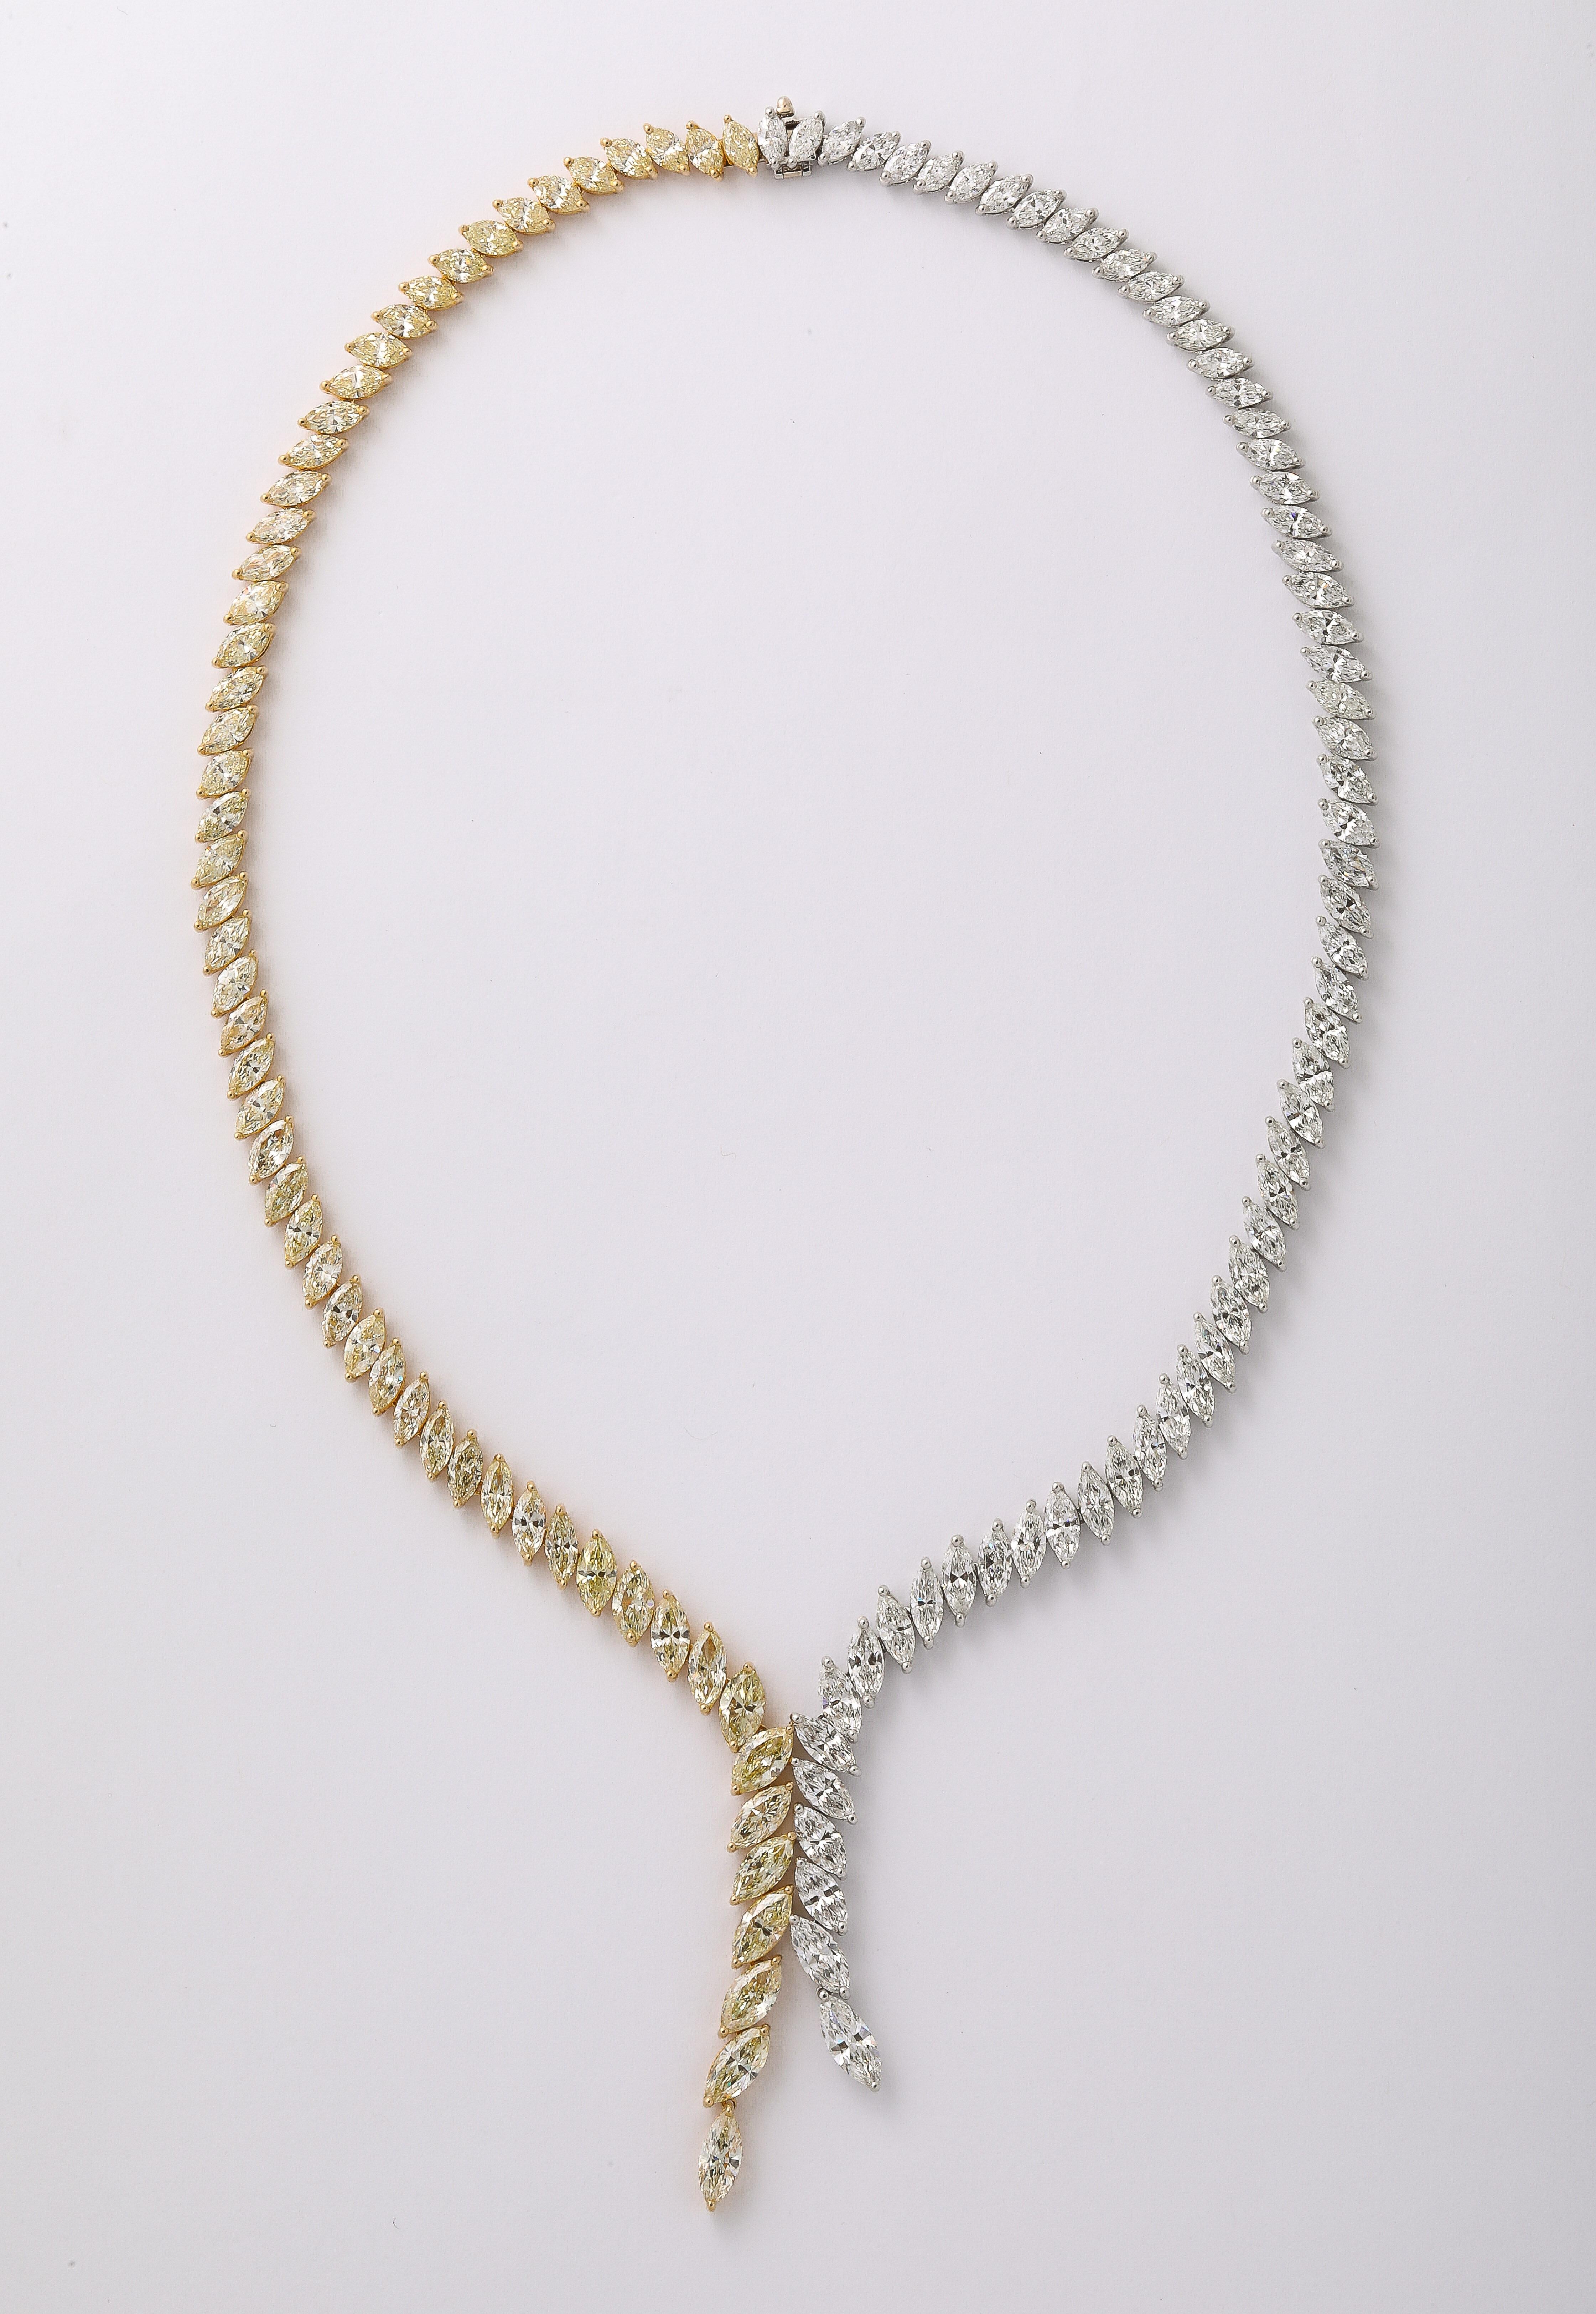 
A remarkable piece. 

40 carats of Yellow and White Marquise Diamonds set in platinum and 18k yellow gold.

A suite of matching yellow and white marquise diamonds is a rare find. 

16.5 inch length with a 2 inch drop, approximately. 